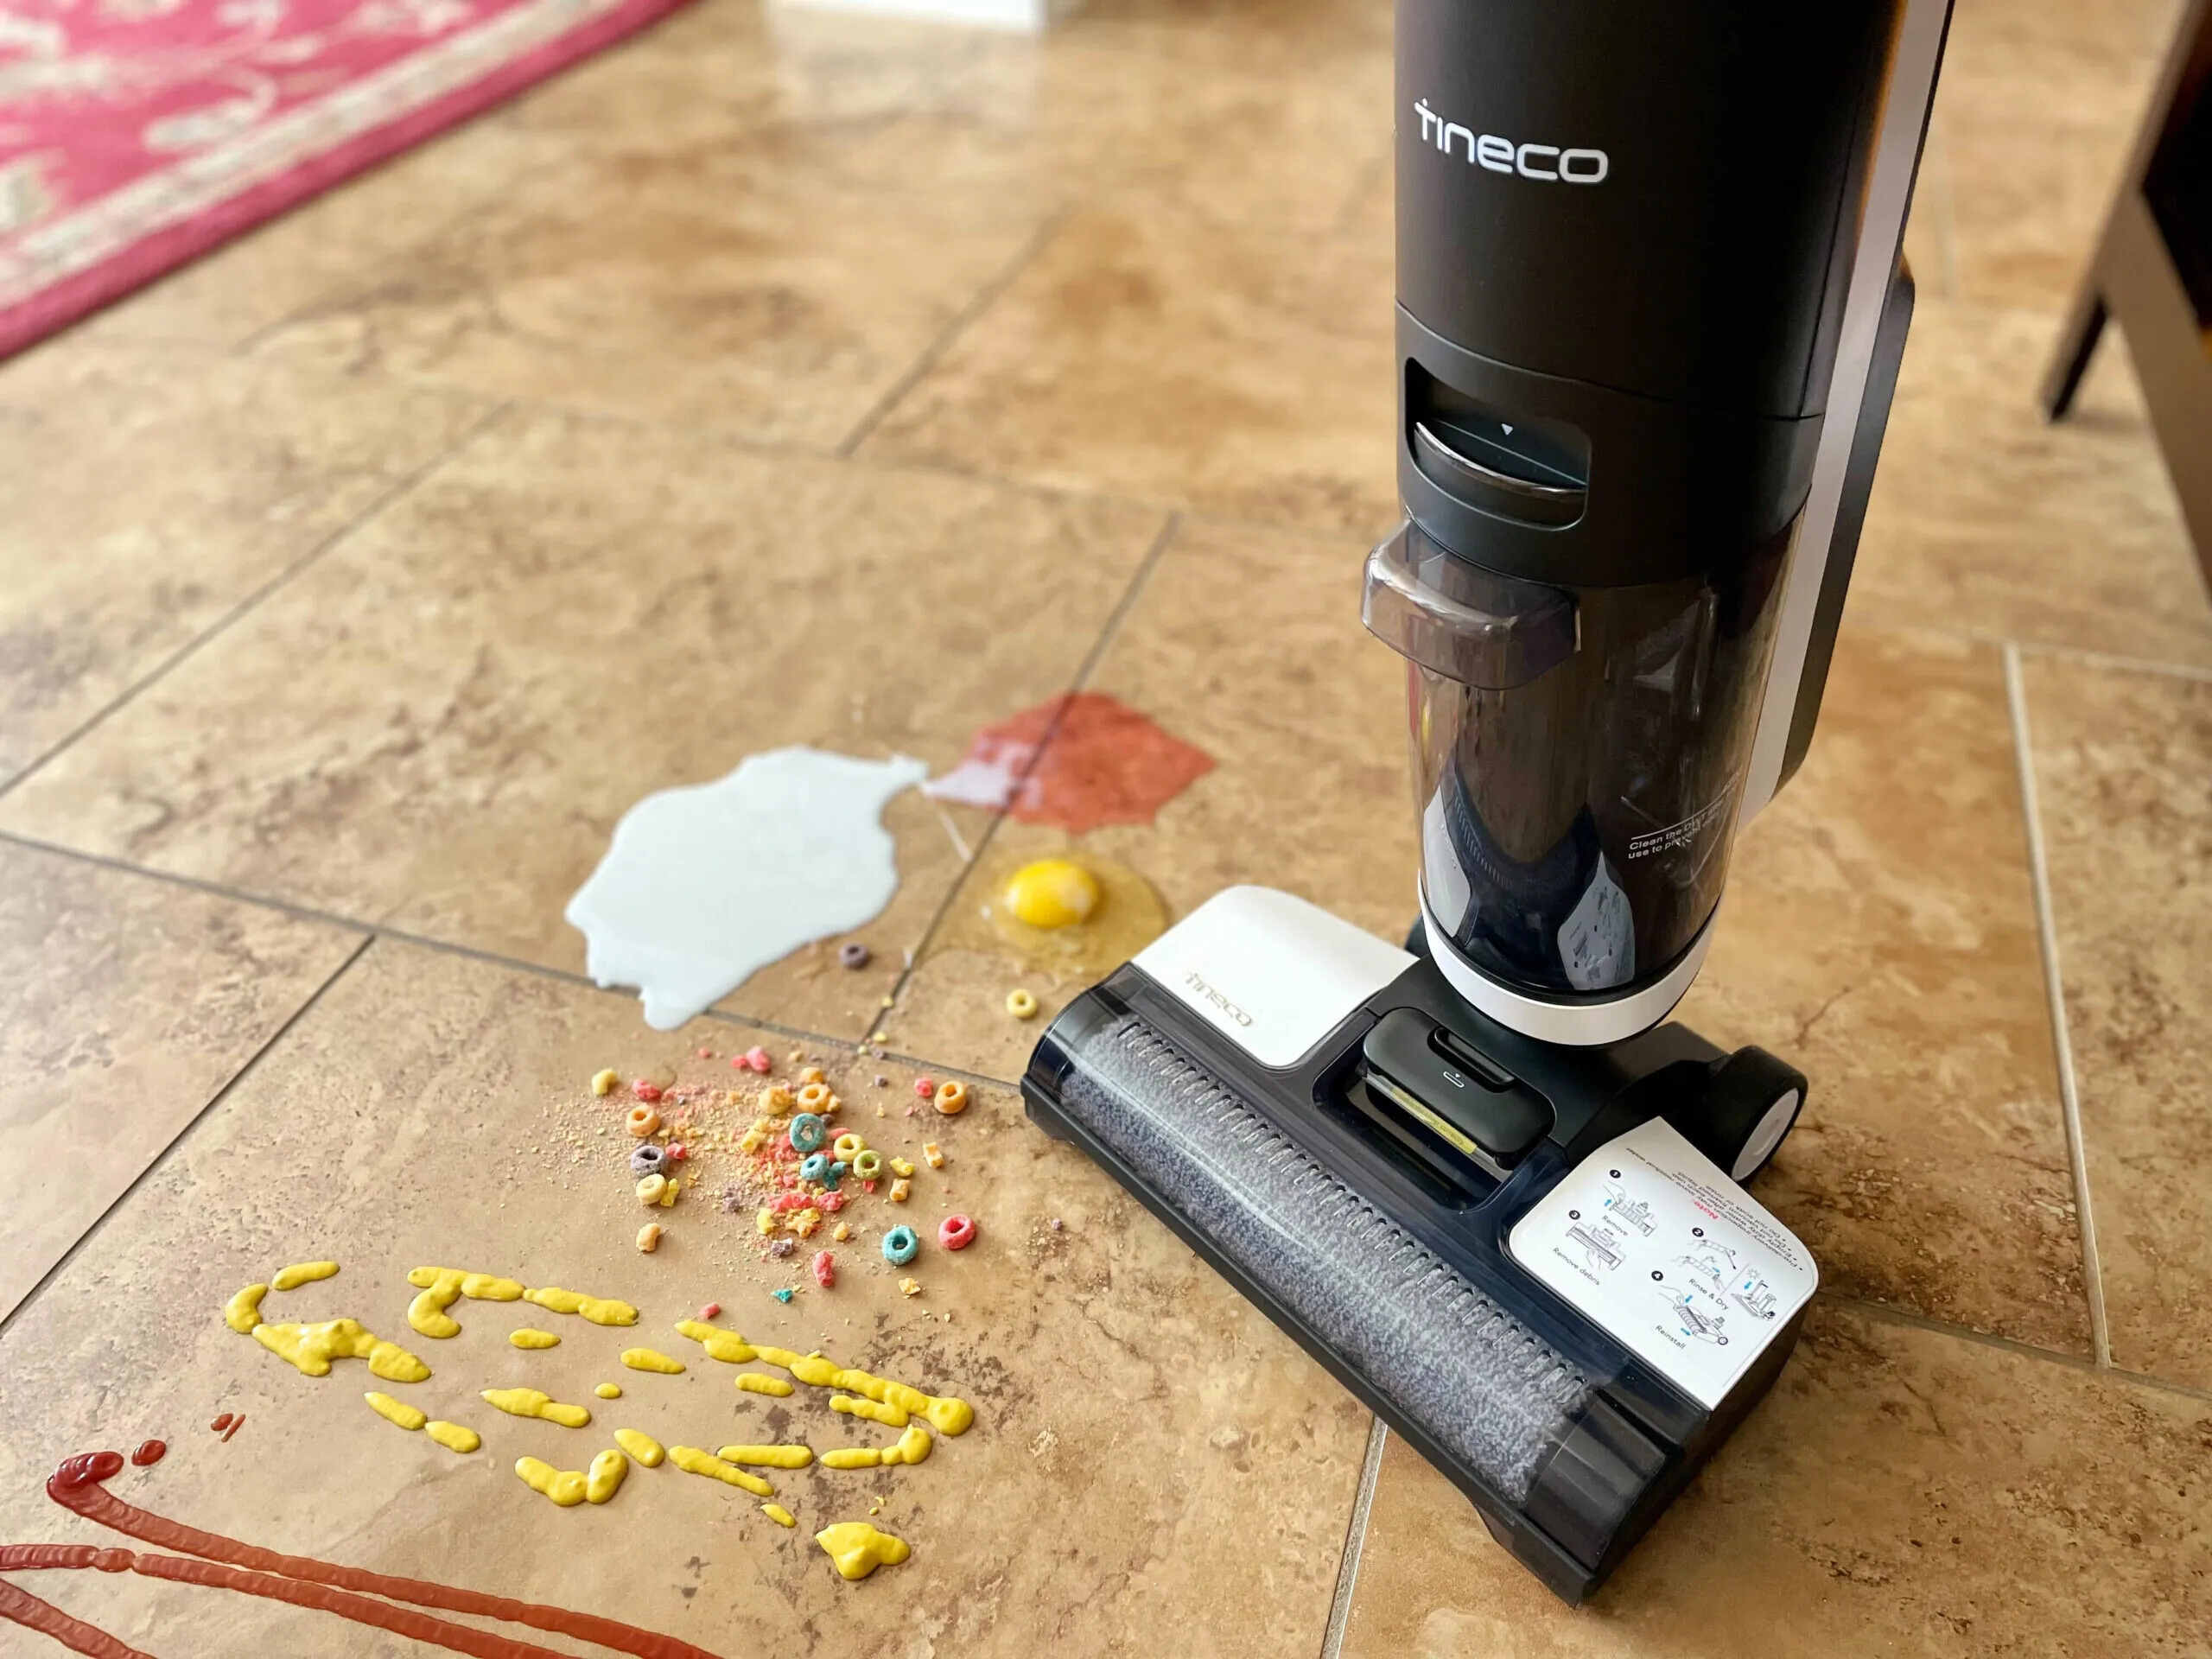 The Tineco IFloor Cordless Vacuum And Mop Works On Hard Floors